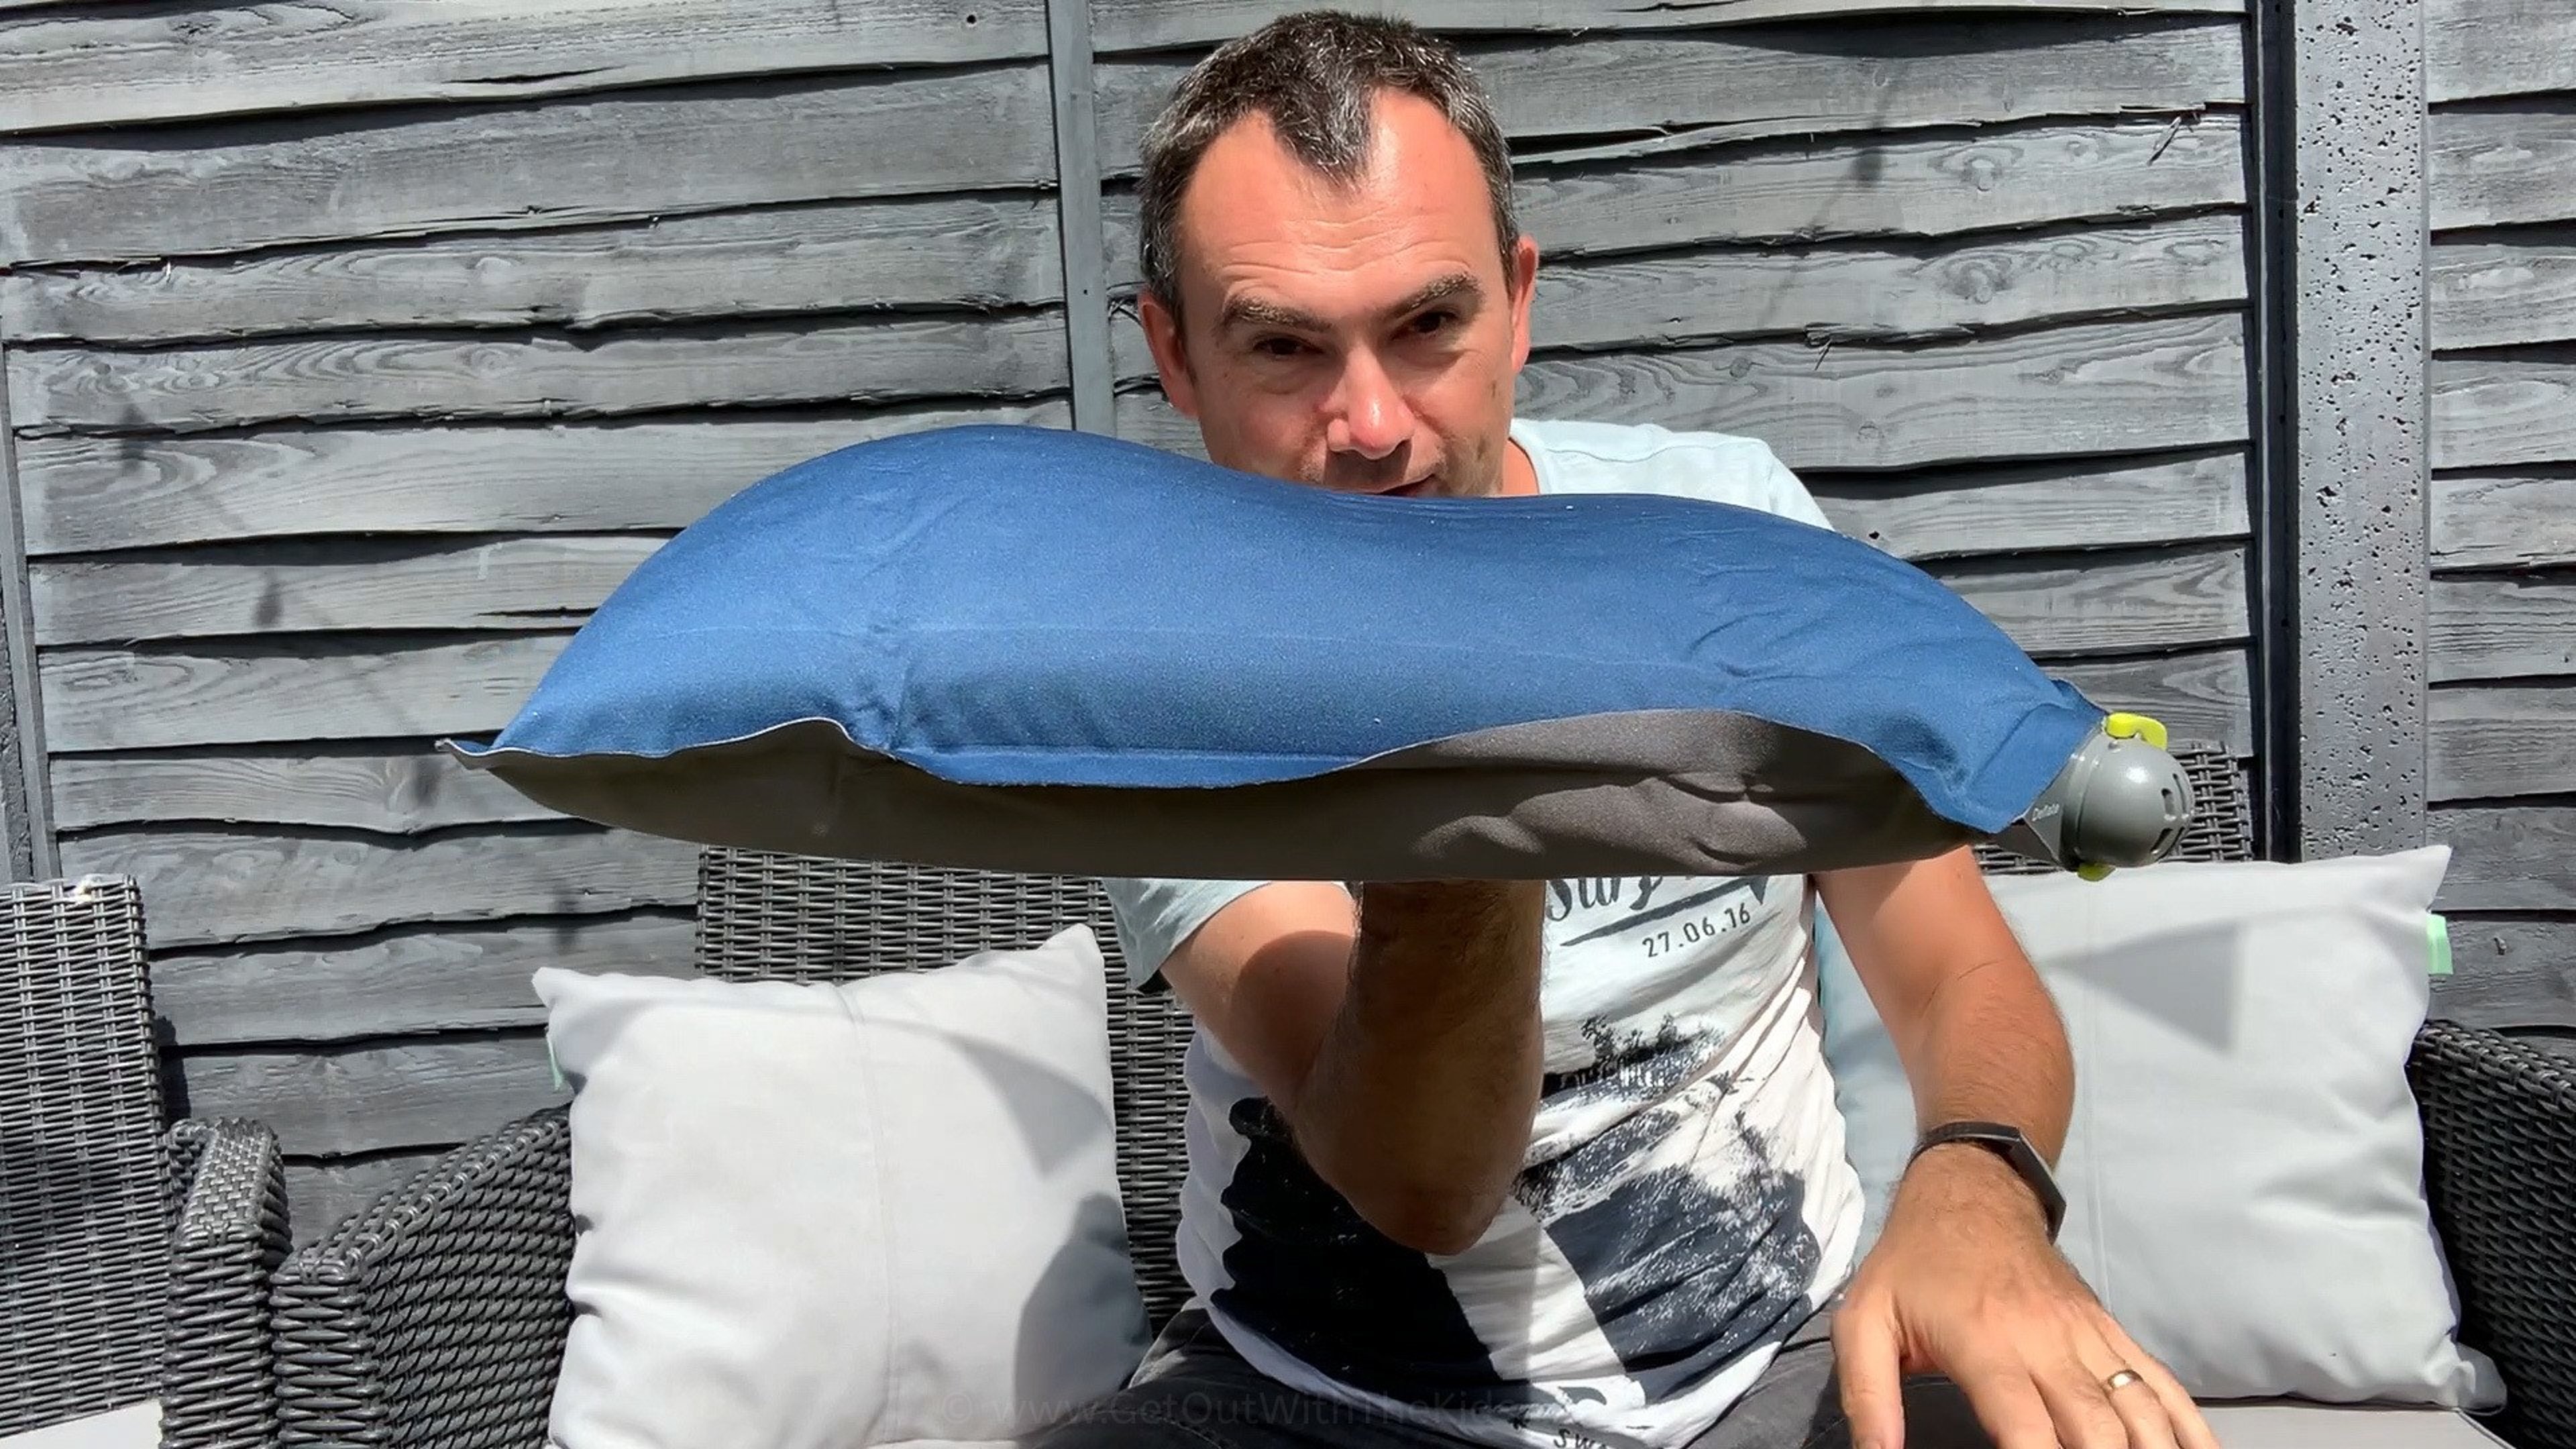 Showing the contoured shape of the Ergo Pillow